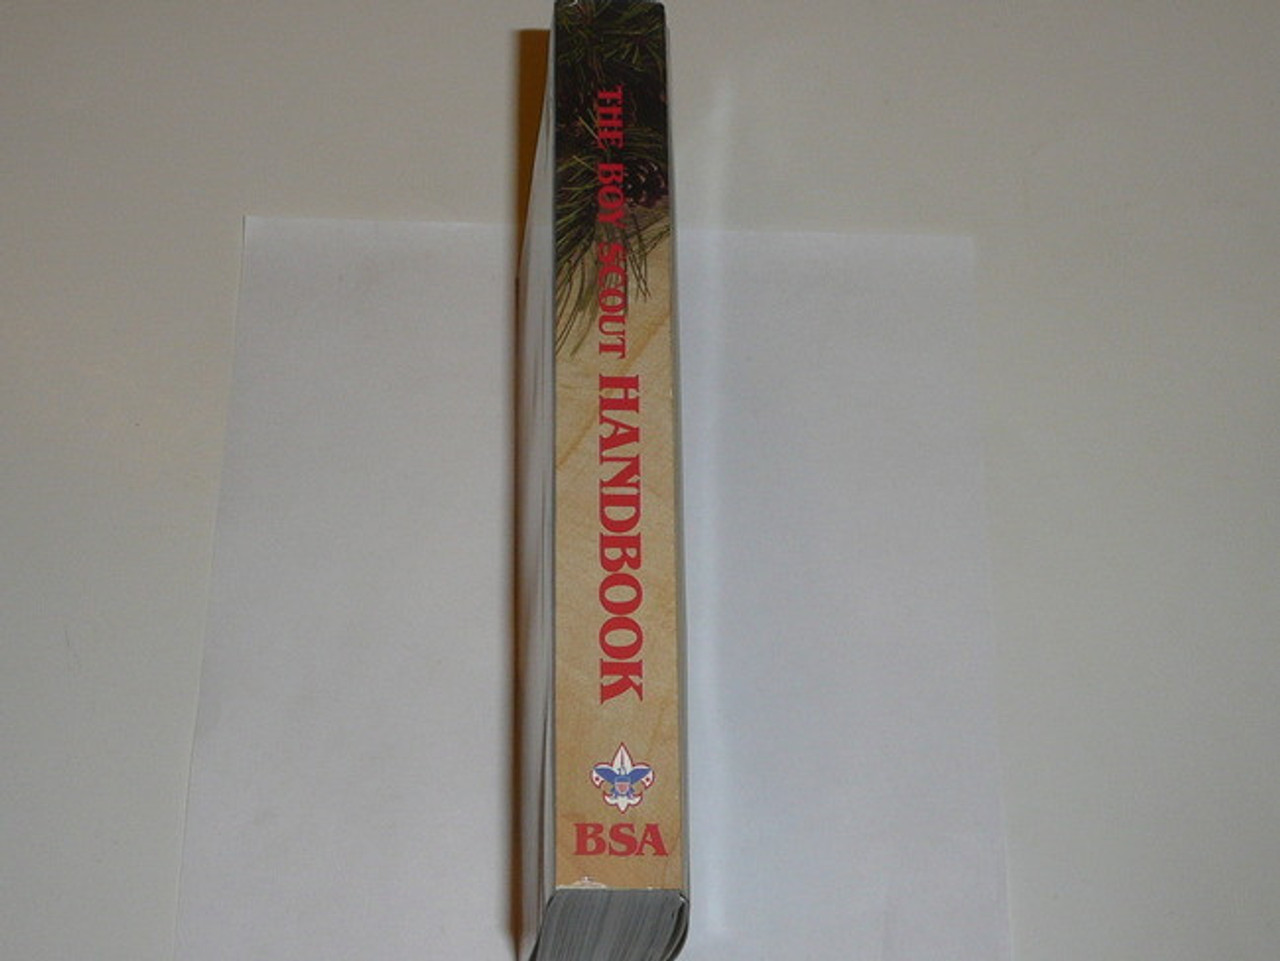 1990 Boy Scout Handbook, Tenth Edition, First Printing, used